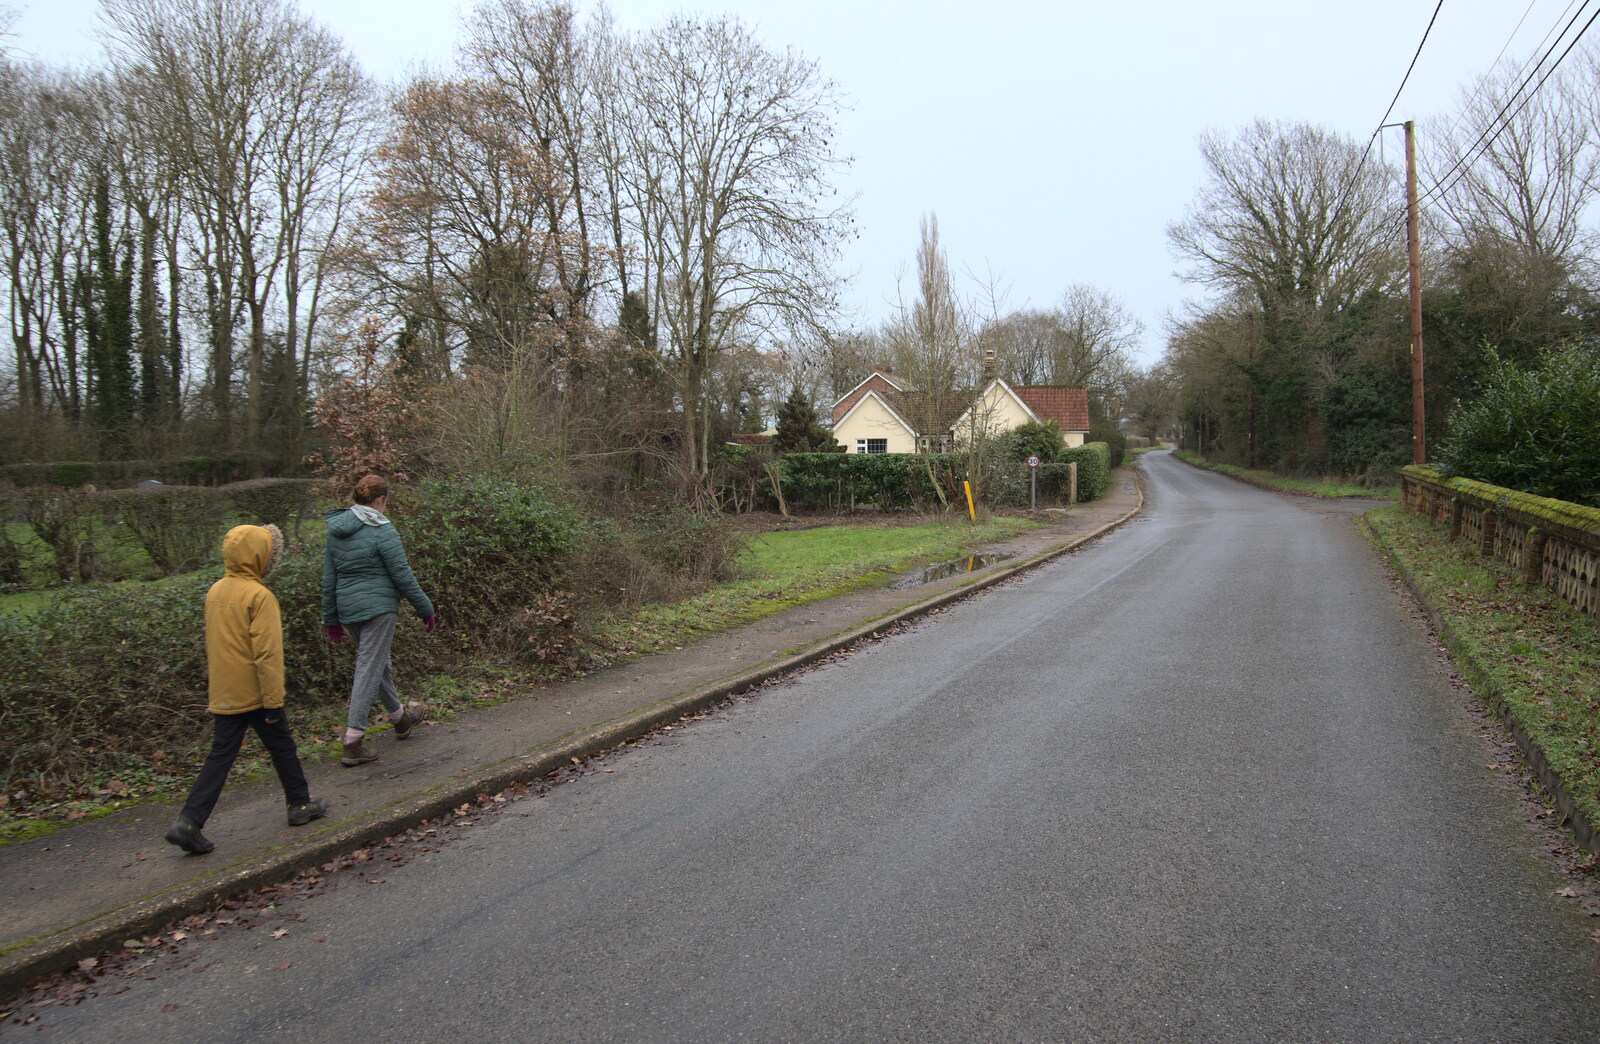 Winter Walks around Brome and Hoxne, Suffolk - 2nd January 2023: We continue off up the road